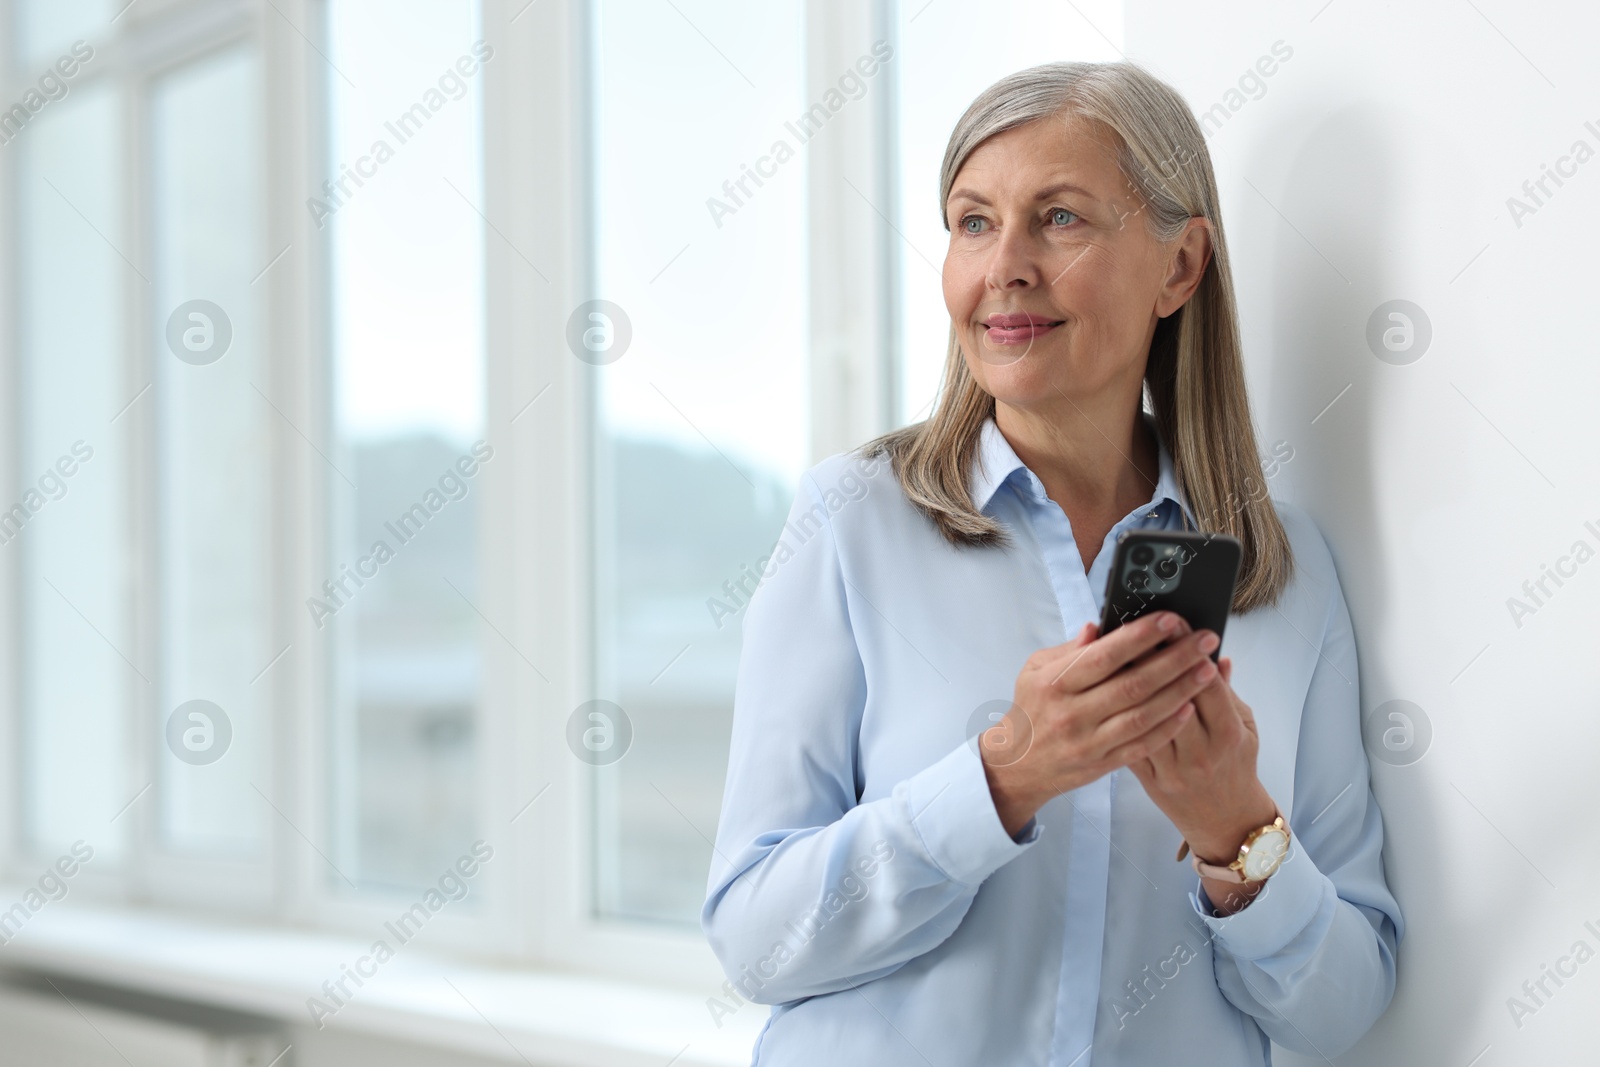 Photo of Senior woman using mobile phone at home, space for text